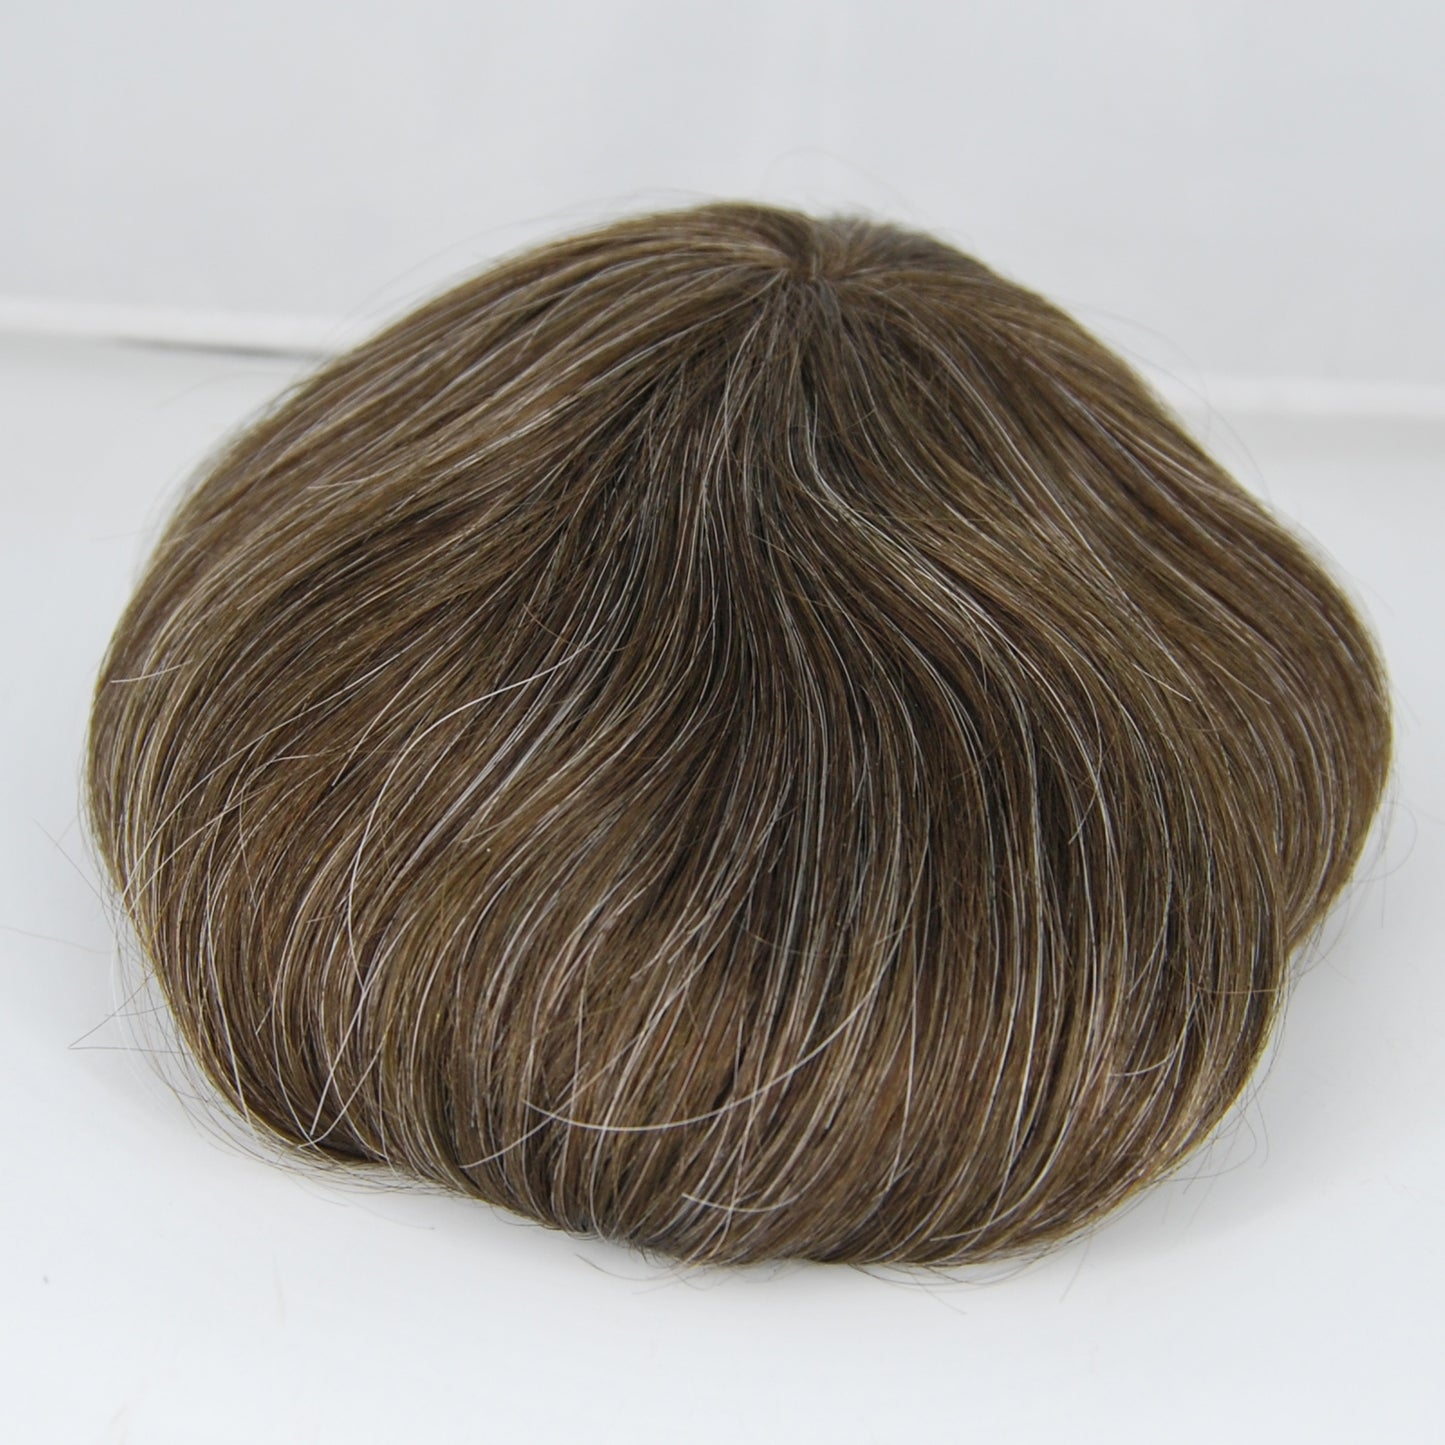 Clearance toupee dark brown mixed 20% grey hair piece for men all french lace durable breathable hair system